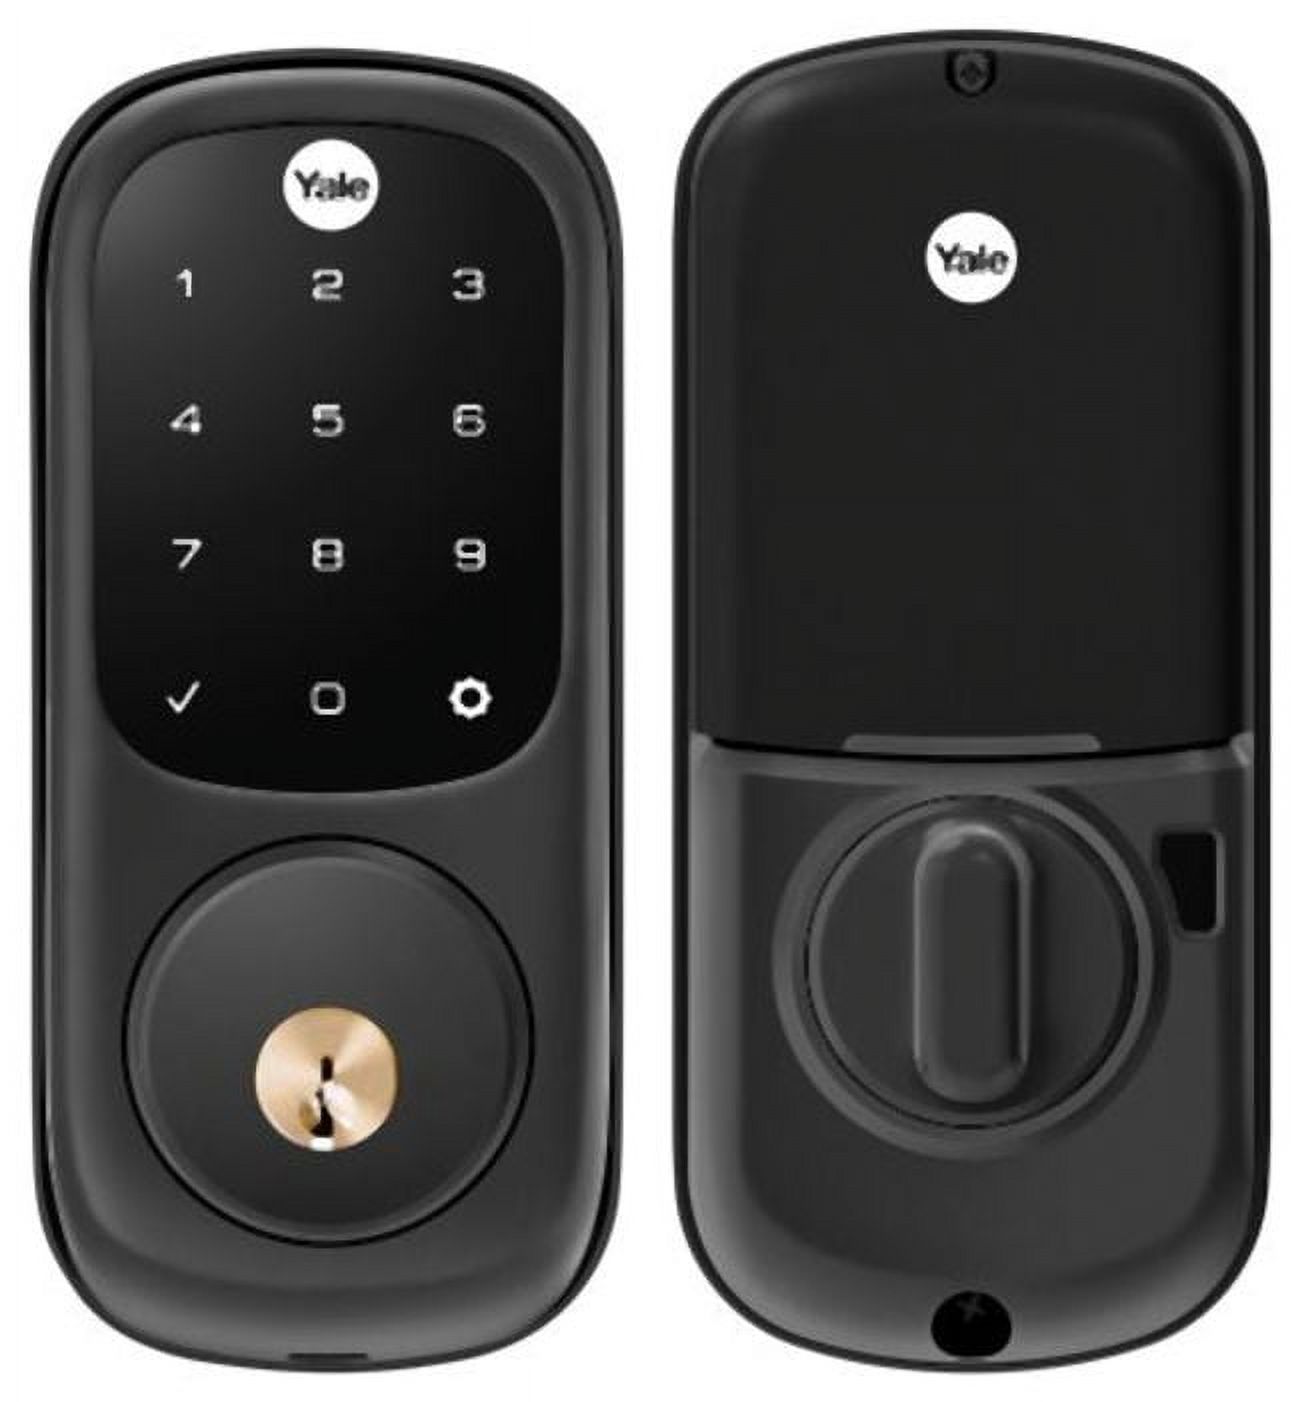 Yale YRD226-CBA-BSP Wi-Fi & BLE Assure Lock Touchscreen Deadbolt, Black Suede - image 1 of 7